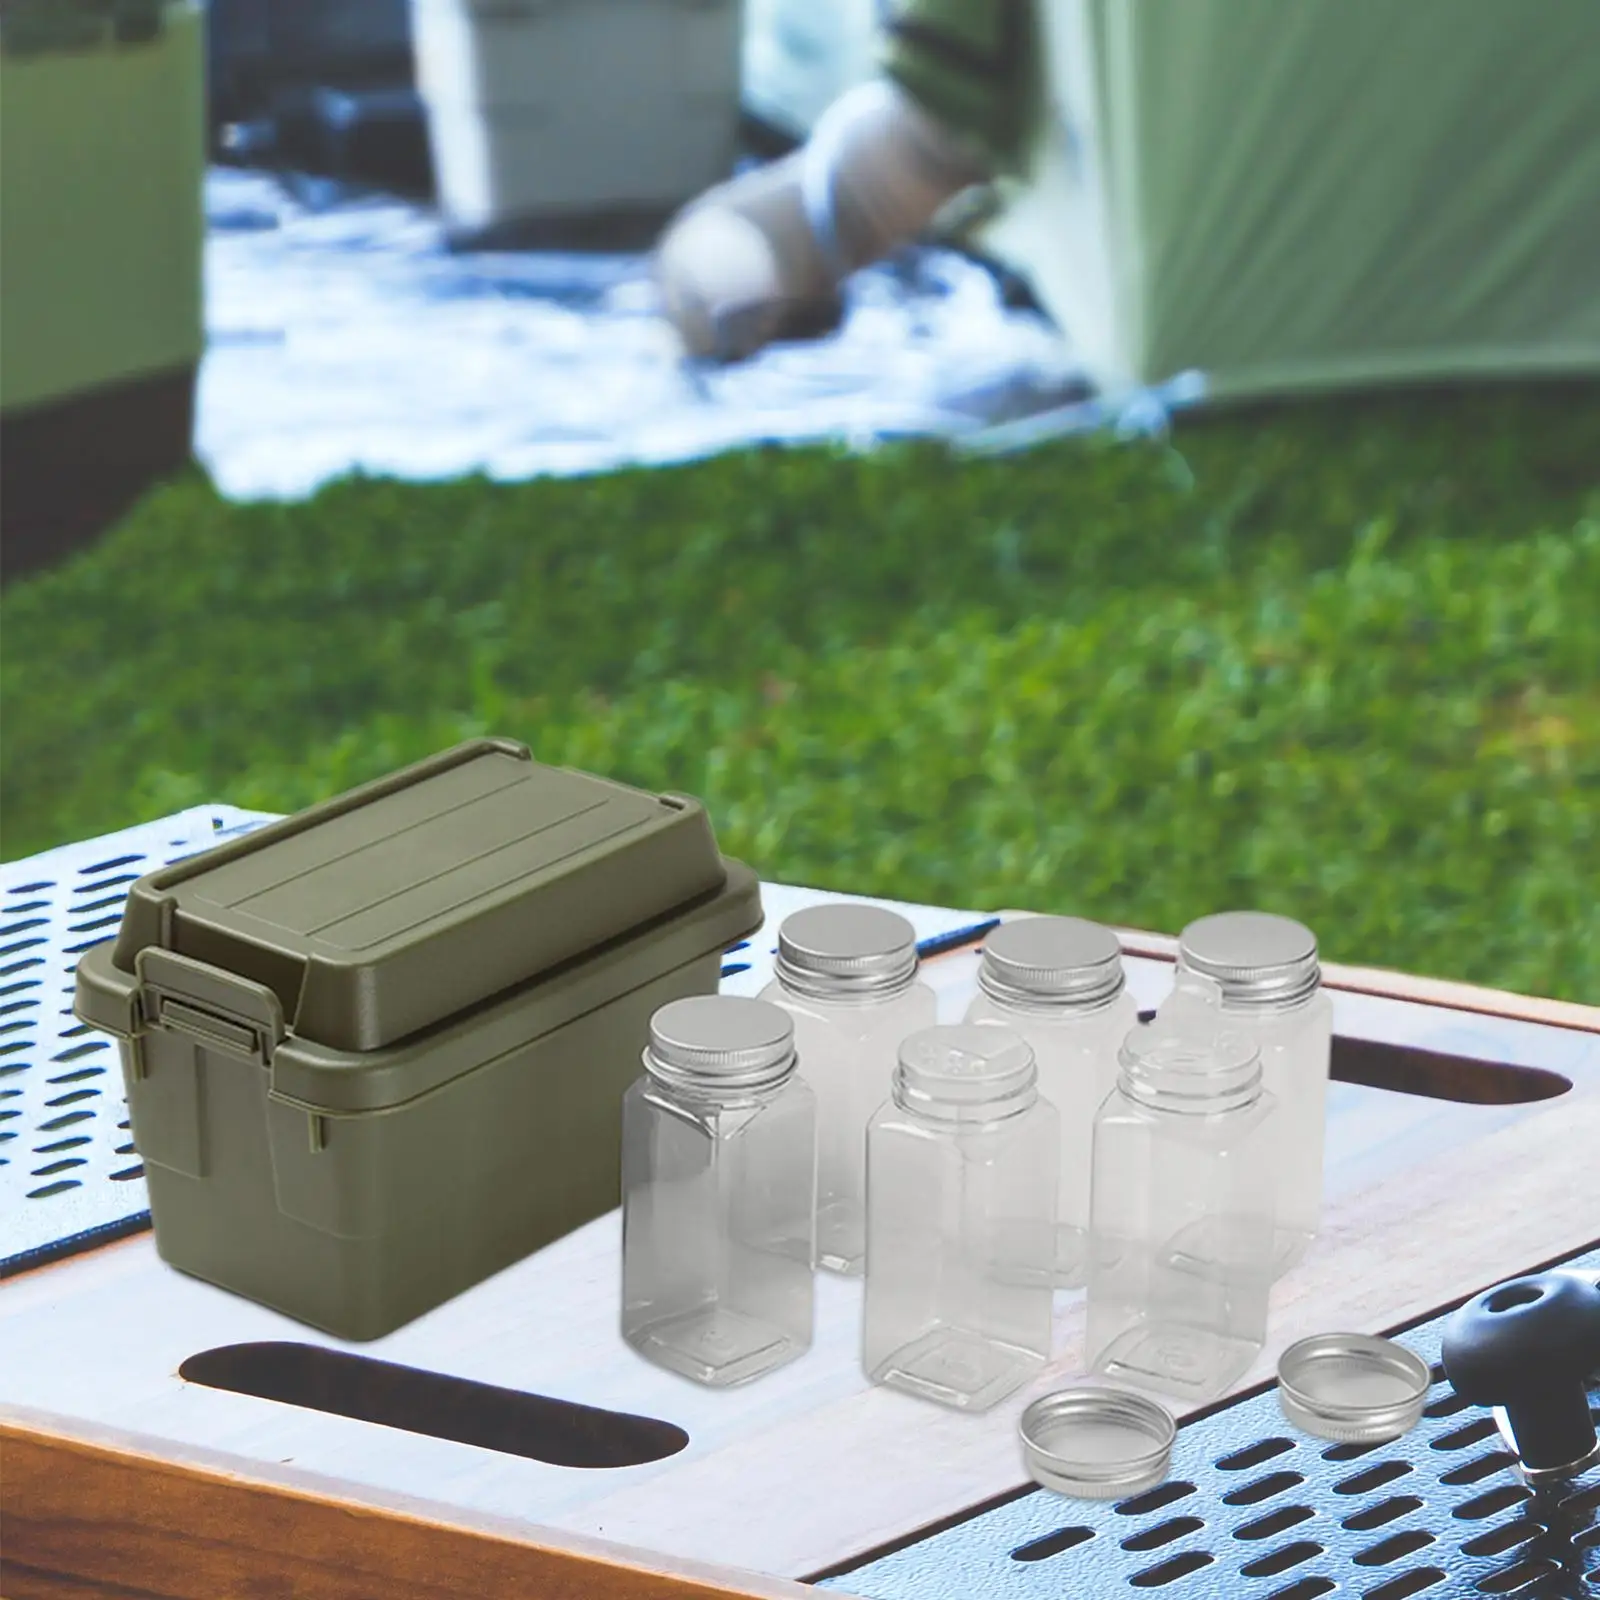 6x Camping Spice Jars Condiment Bottle Seasoning Bottle Portable Spice Organizer for Picnic Cooking Backpacking Outdoor Kitchen